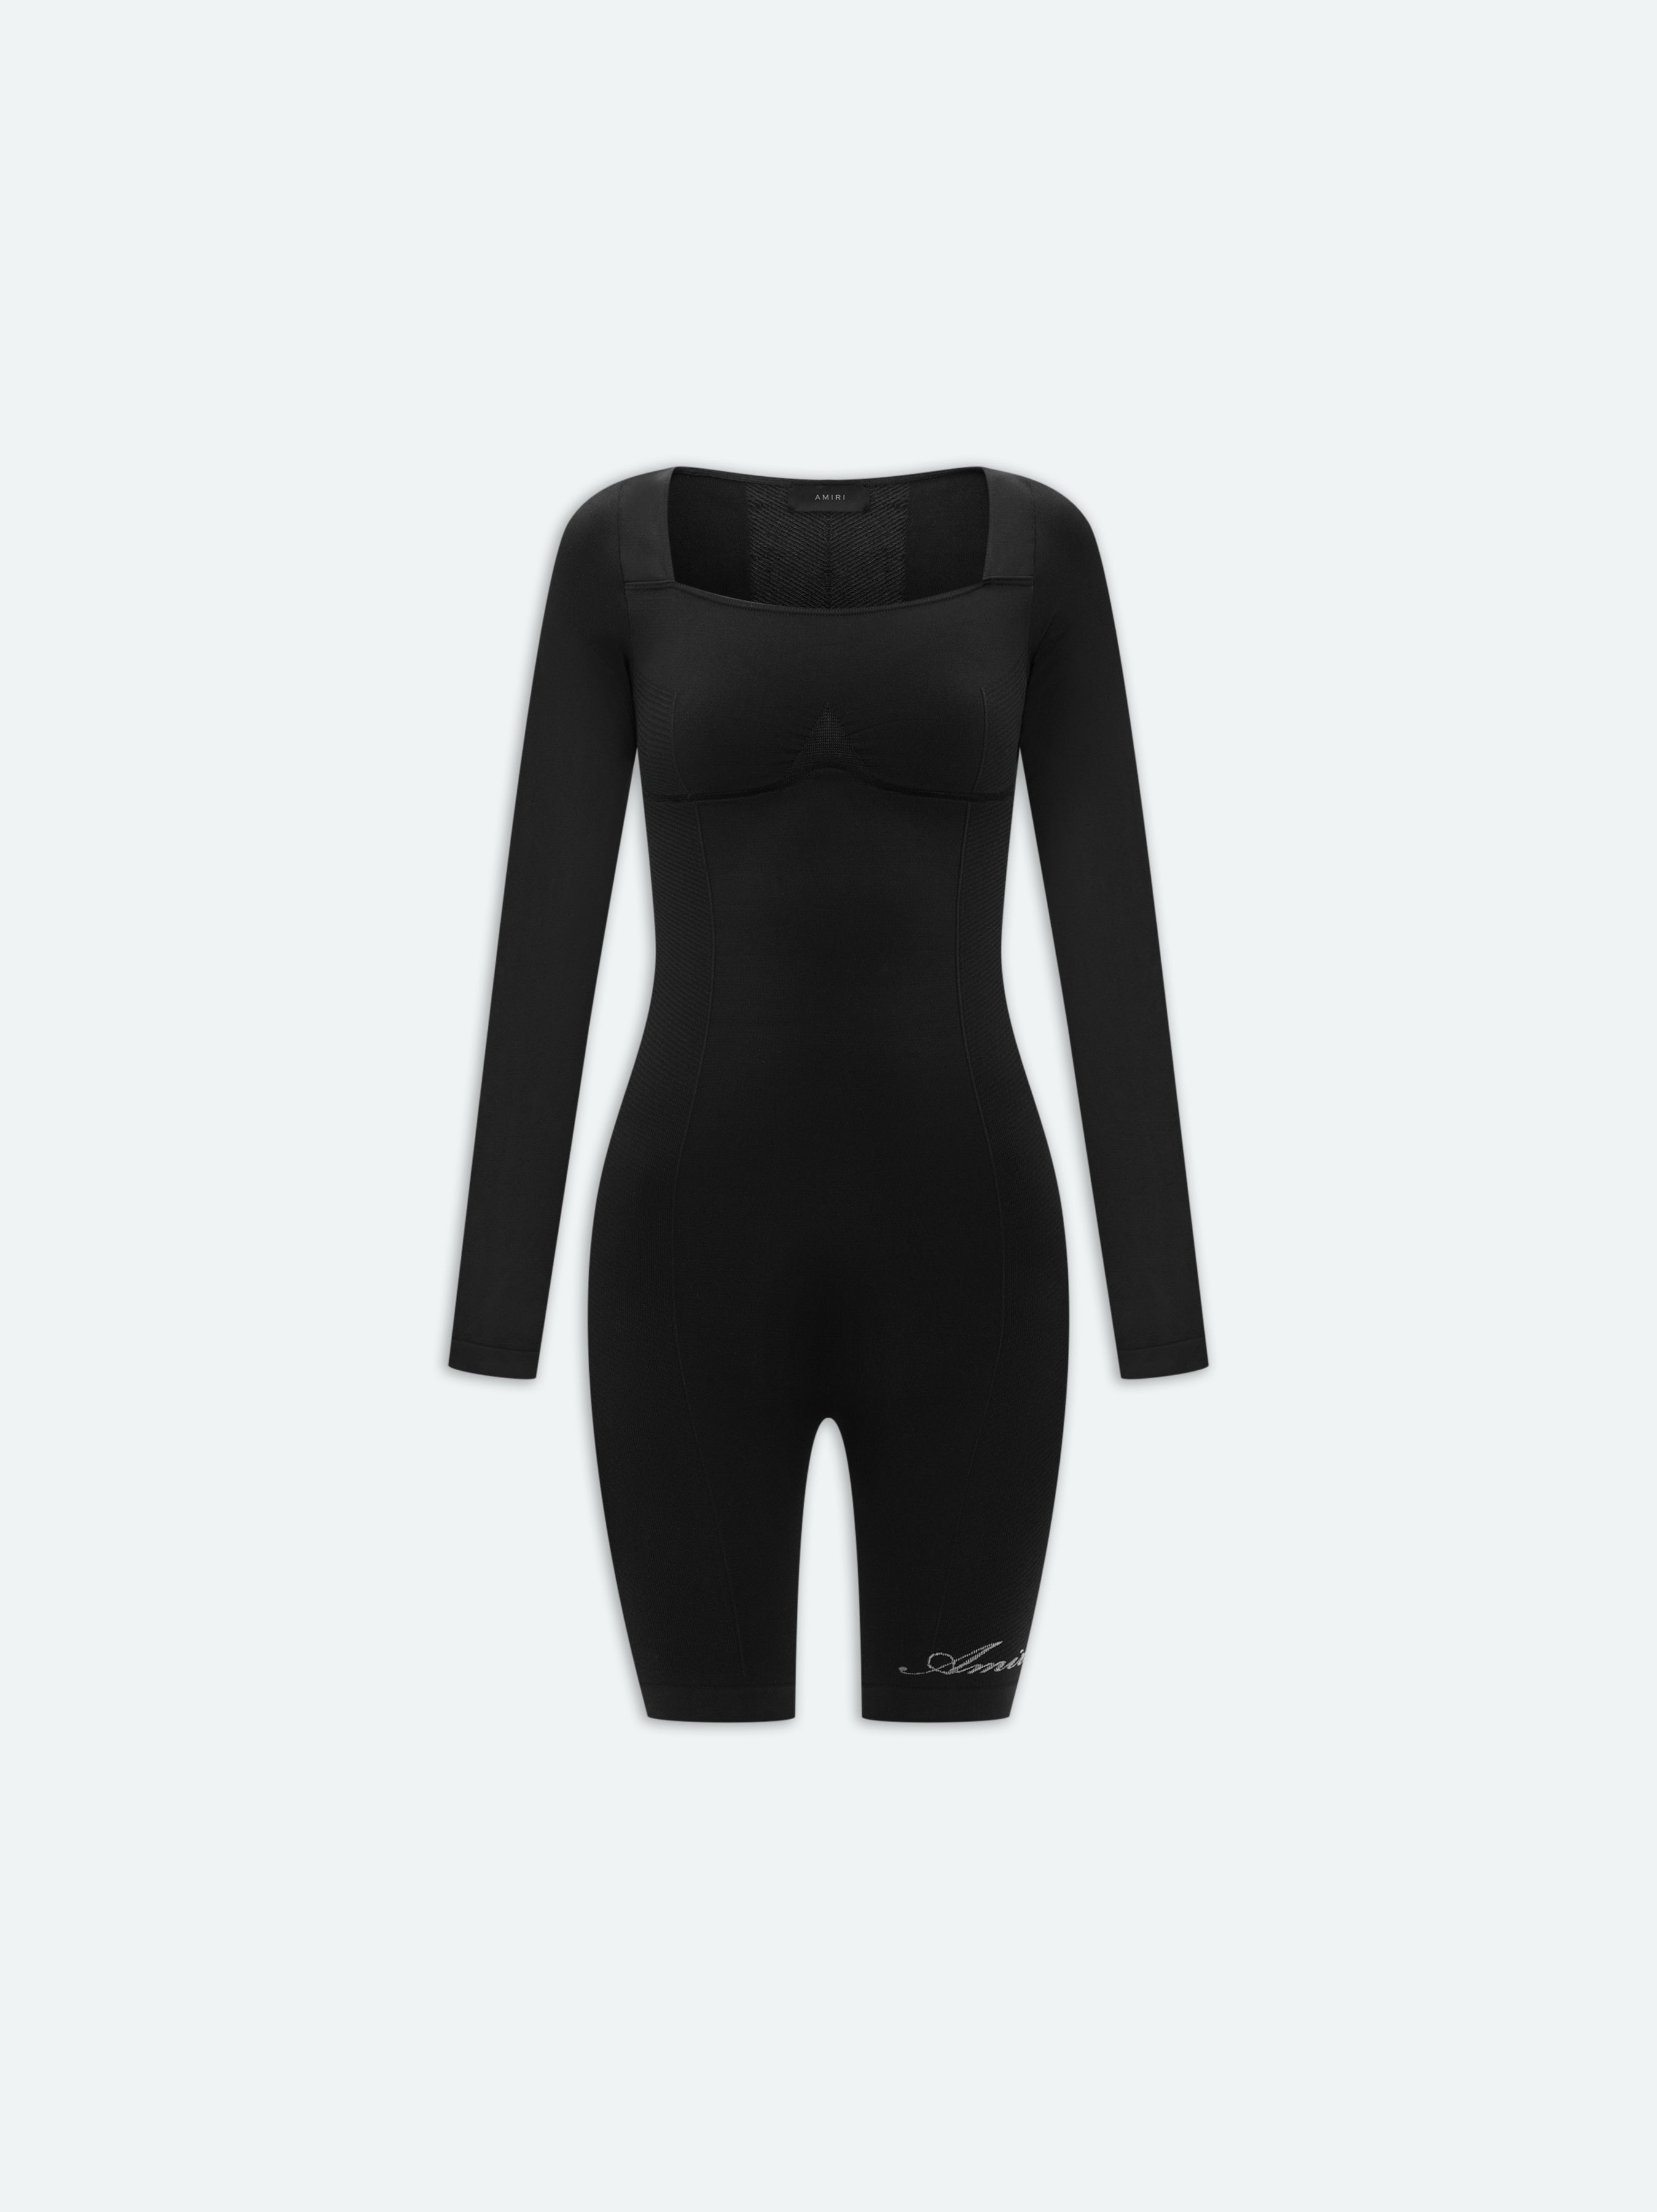 Product WOMEN - SEAMLESS BODYSUIT - Black featured image